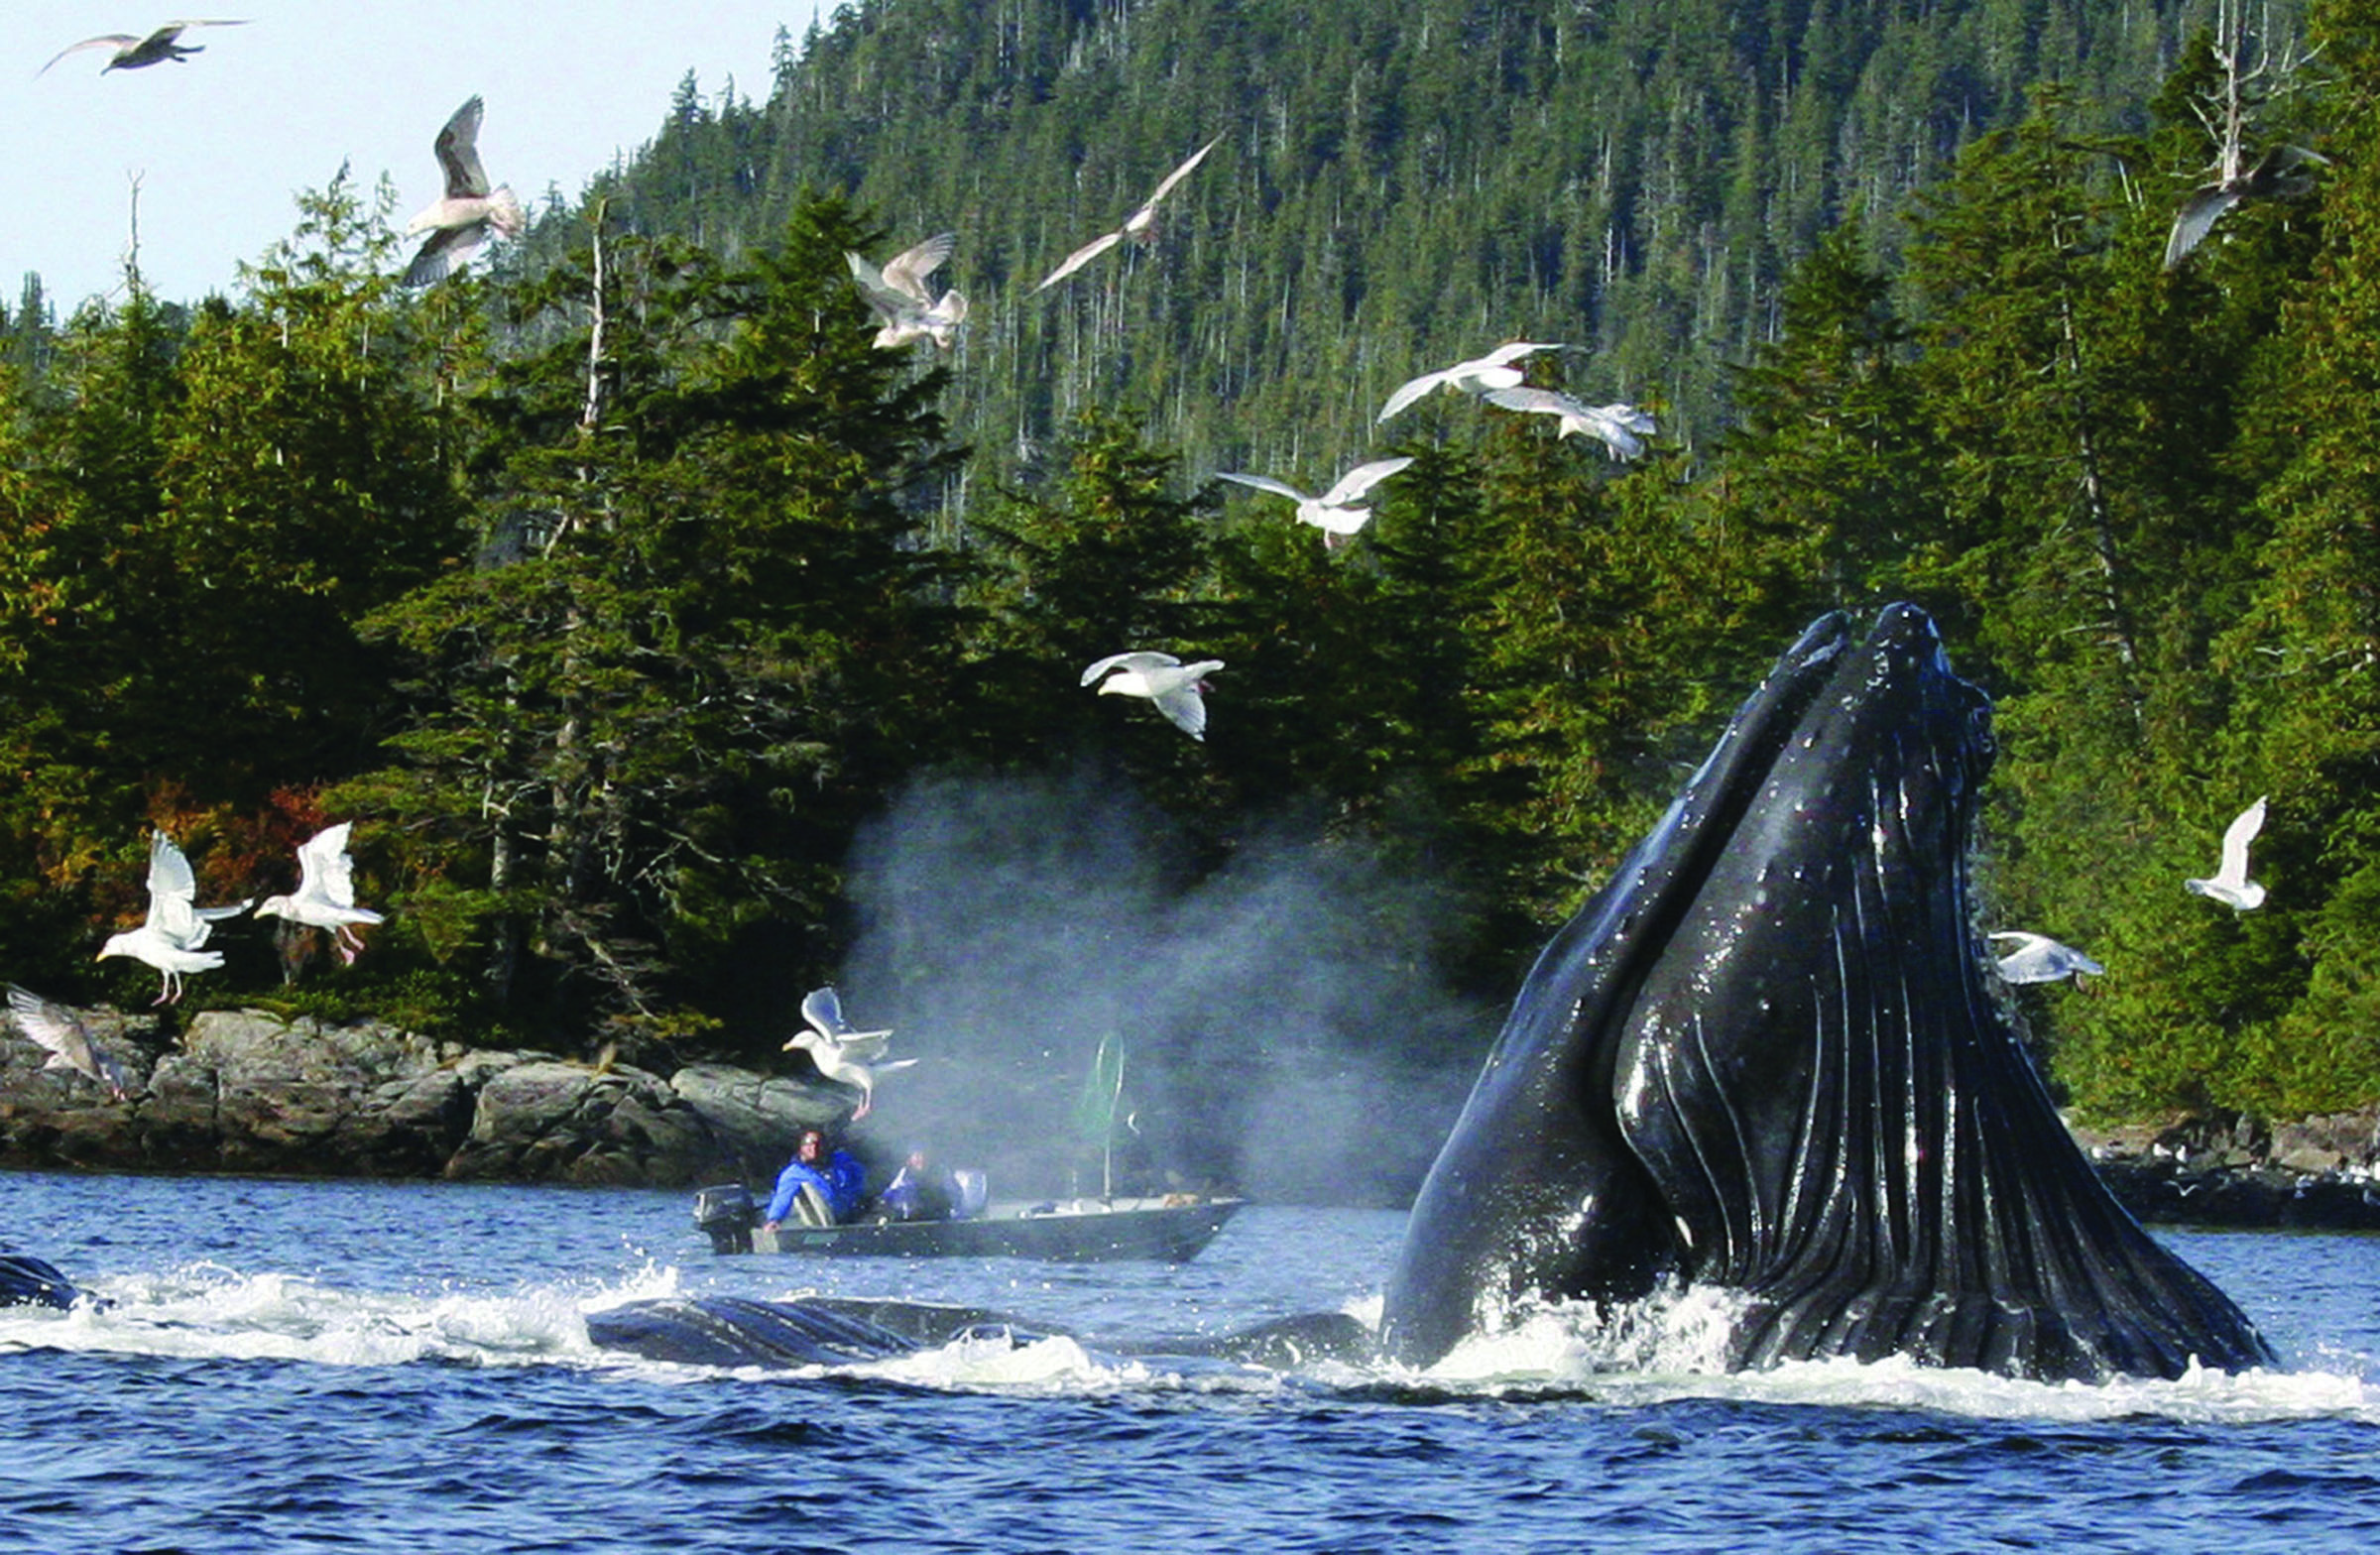 Boaters and fishermen watch as a group of up to six humpback whales feed on herring near Ketchikan